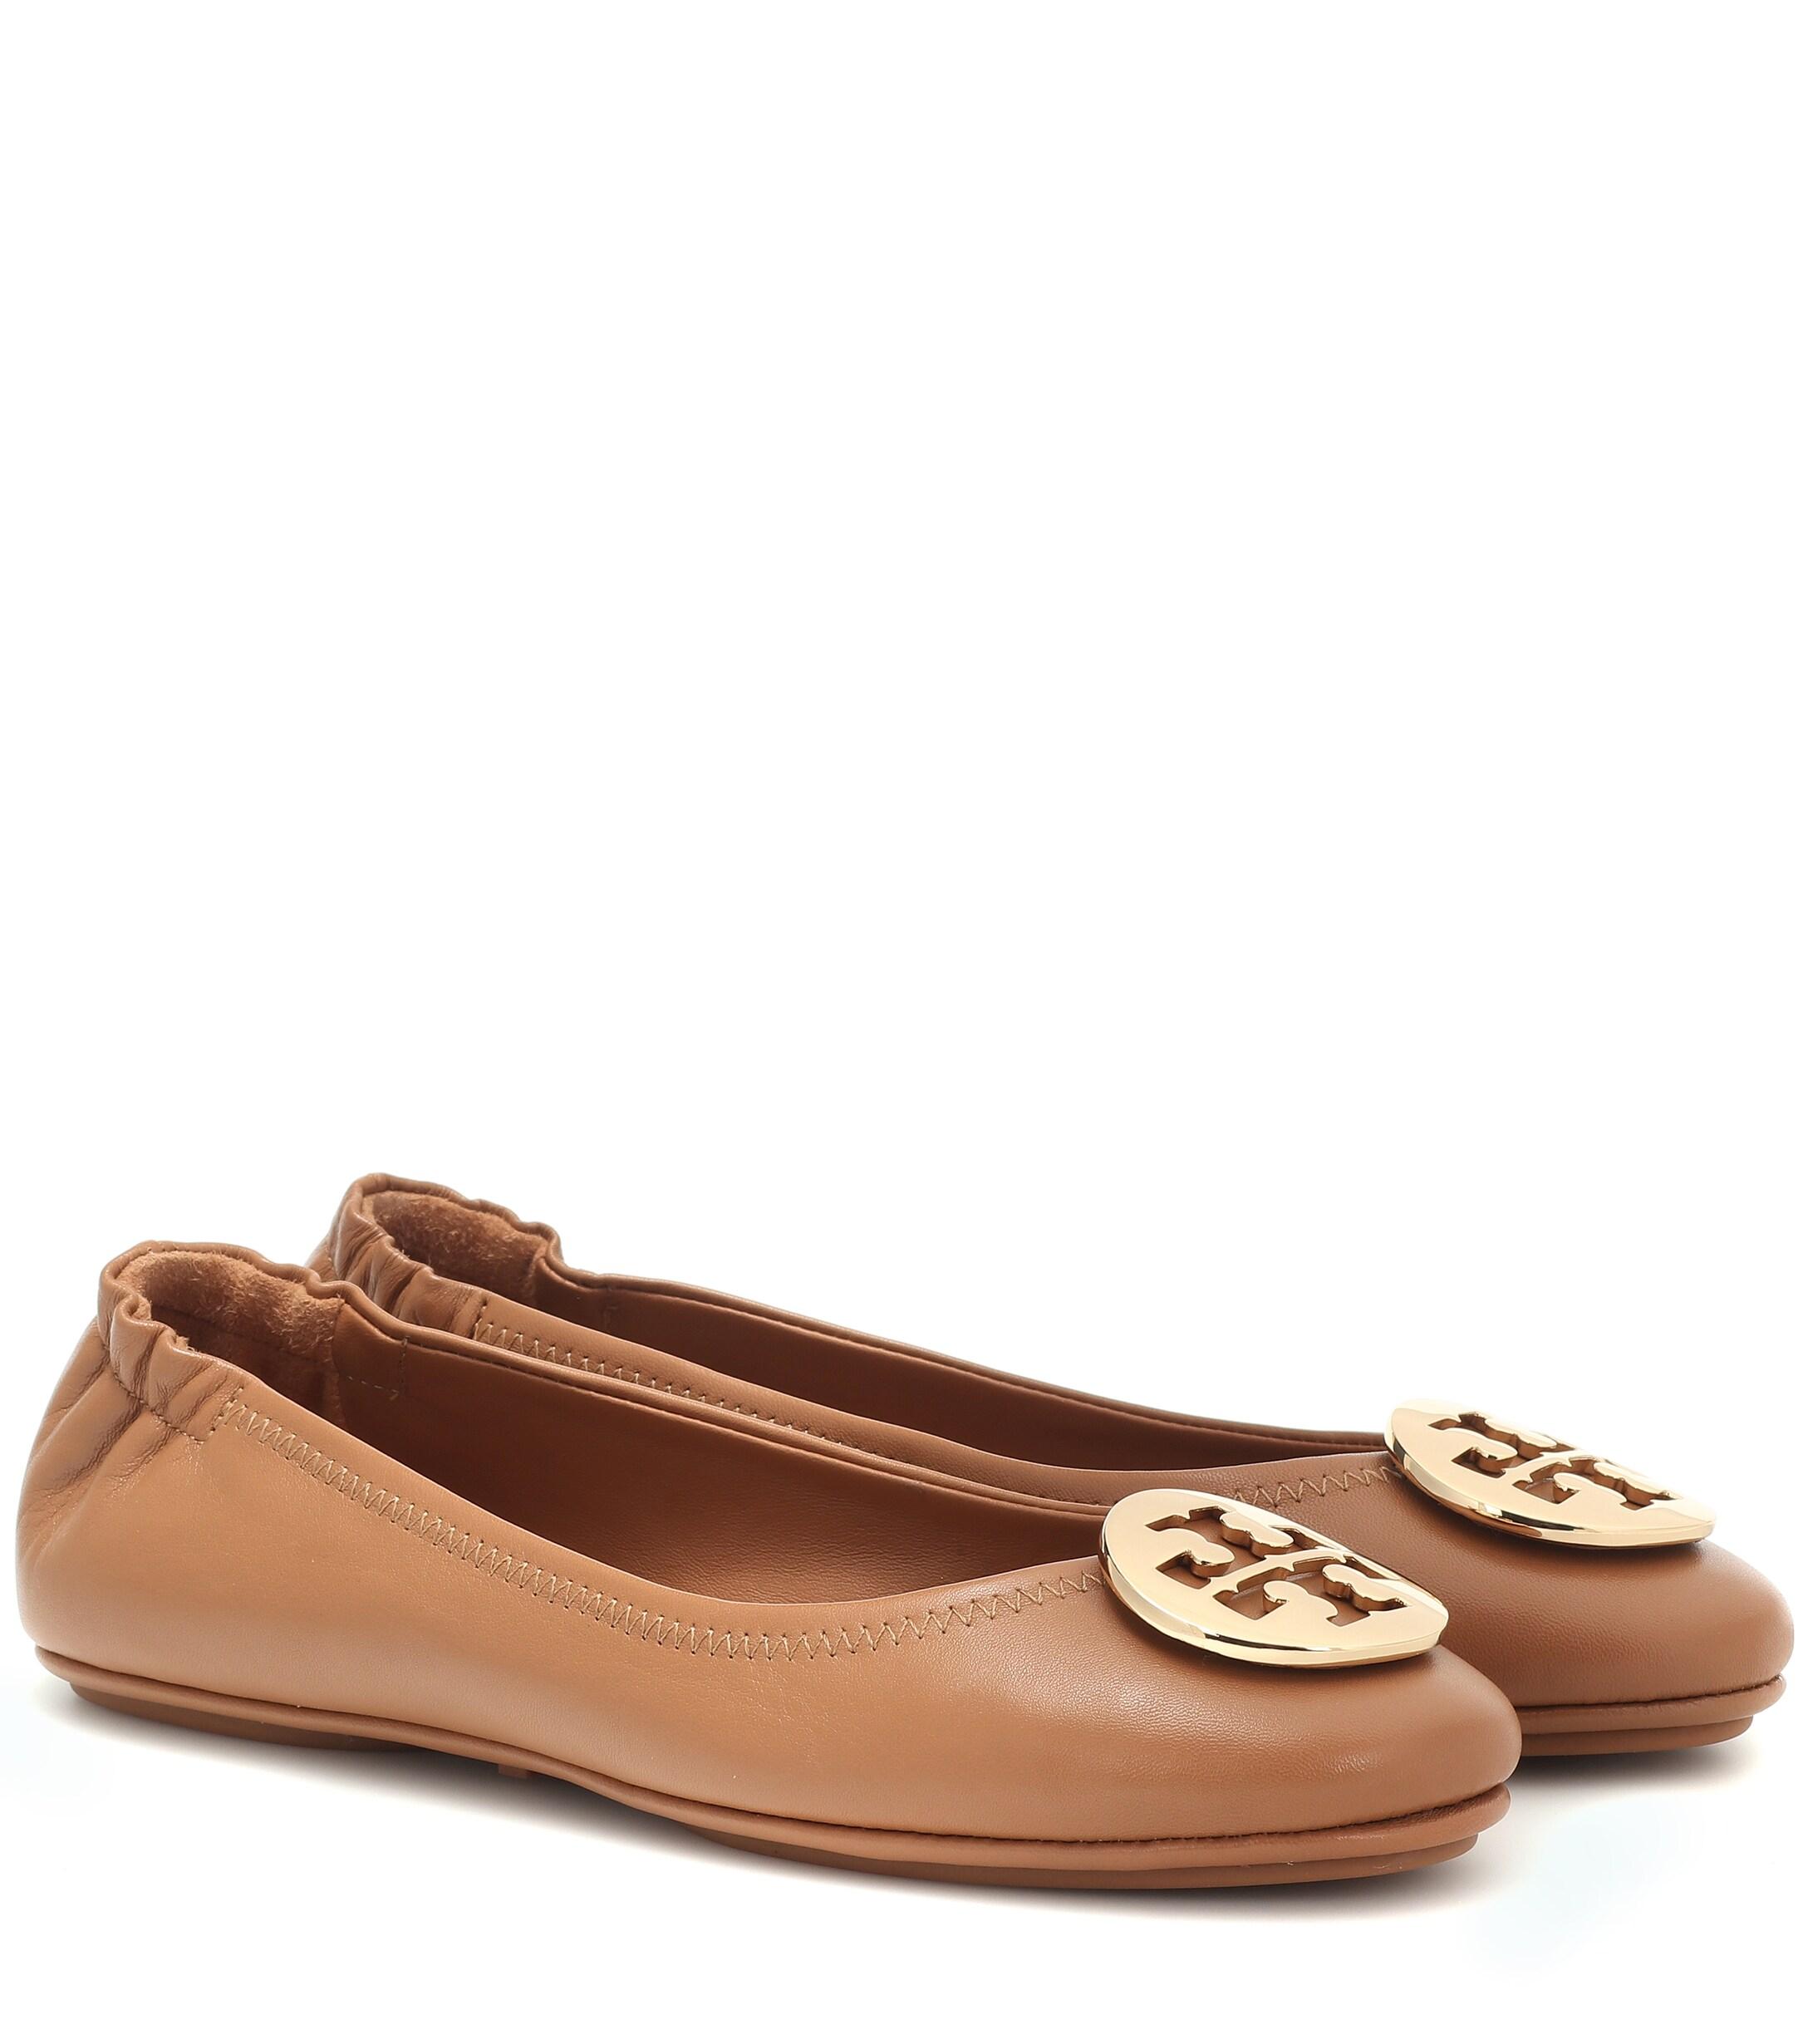 Tory Burch Minnie Travel Leather Ballet Flats in Brown - Lyst